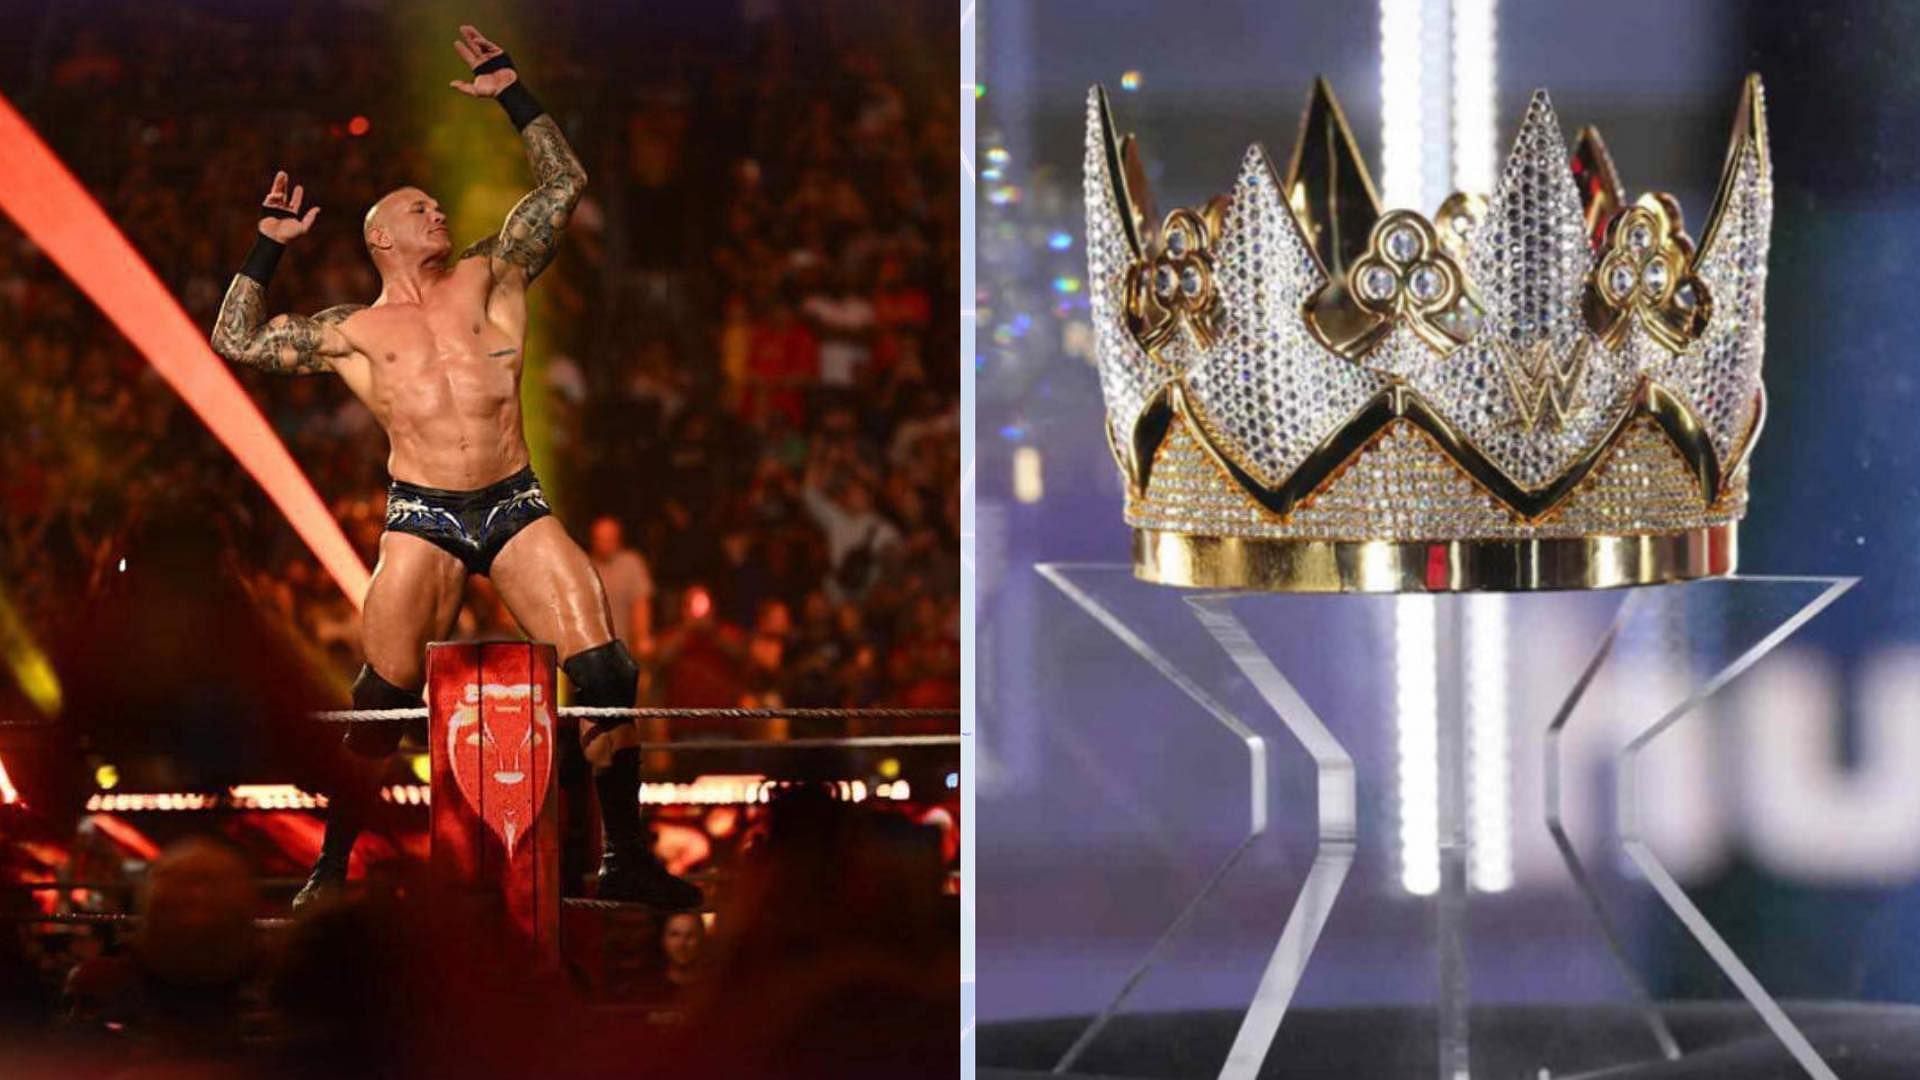 King and Queen of the Ring is set to take place at the Jeddah Super Dome in Jeddah, Saudi Arabia